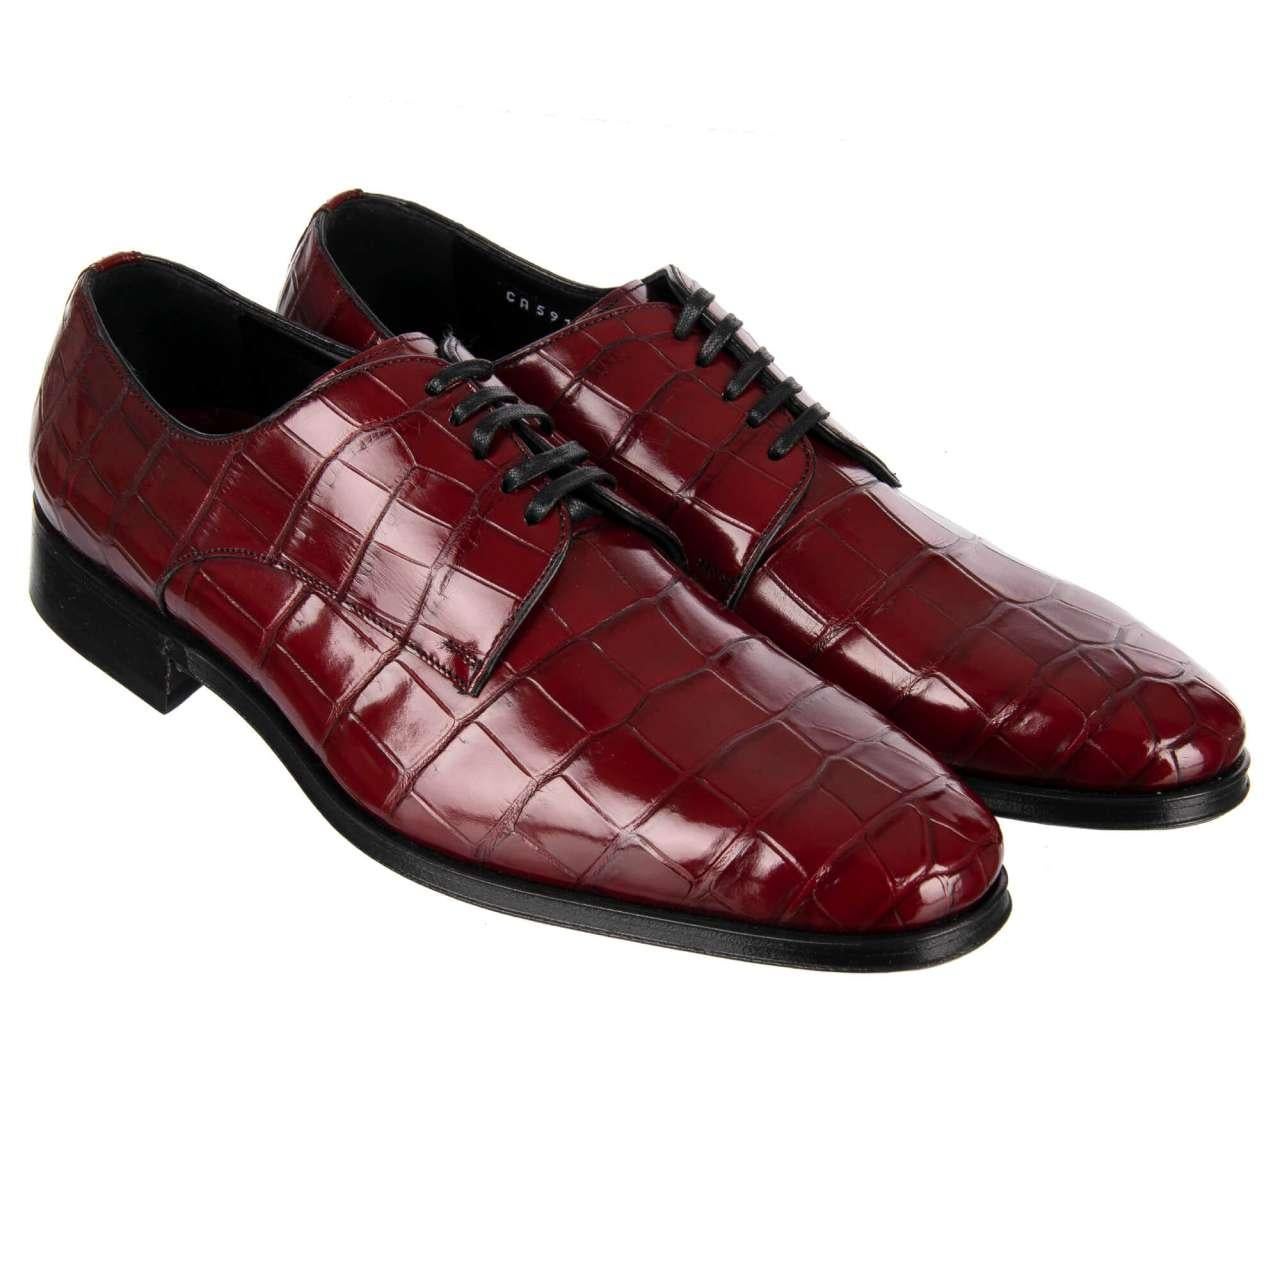 - Very exclusive and rare formal crocodile leather derby shoes VENEZIA in bordeaux red by DOLCE & GABBANA - MADE IN ITALY - Former RRP: EUR 8.500 - New with Box - Model: CA5918-A2F64-8X053 - Material: 100% Crocodile Leather (Coccodrillo) - Sole: